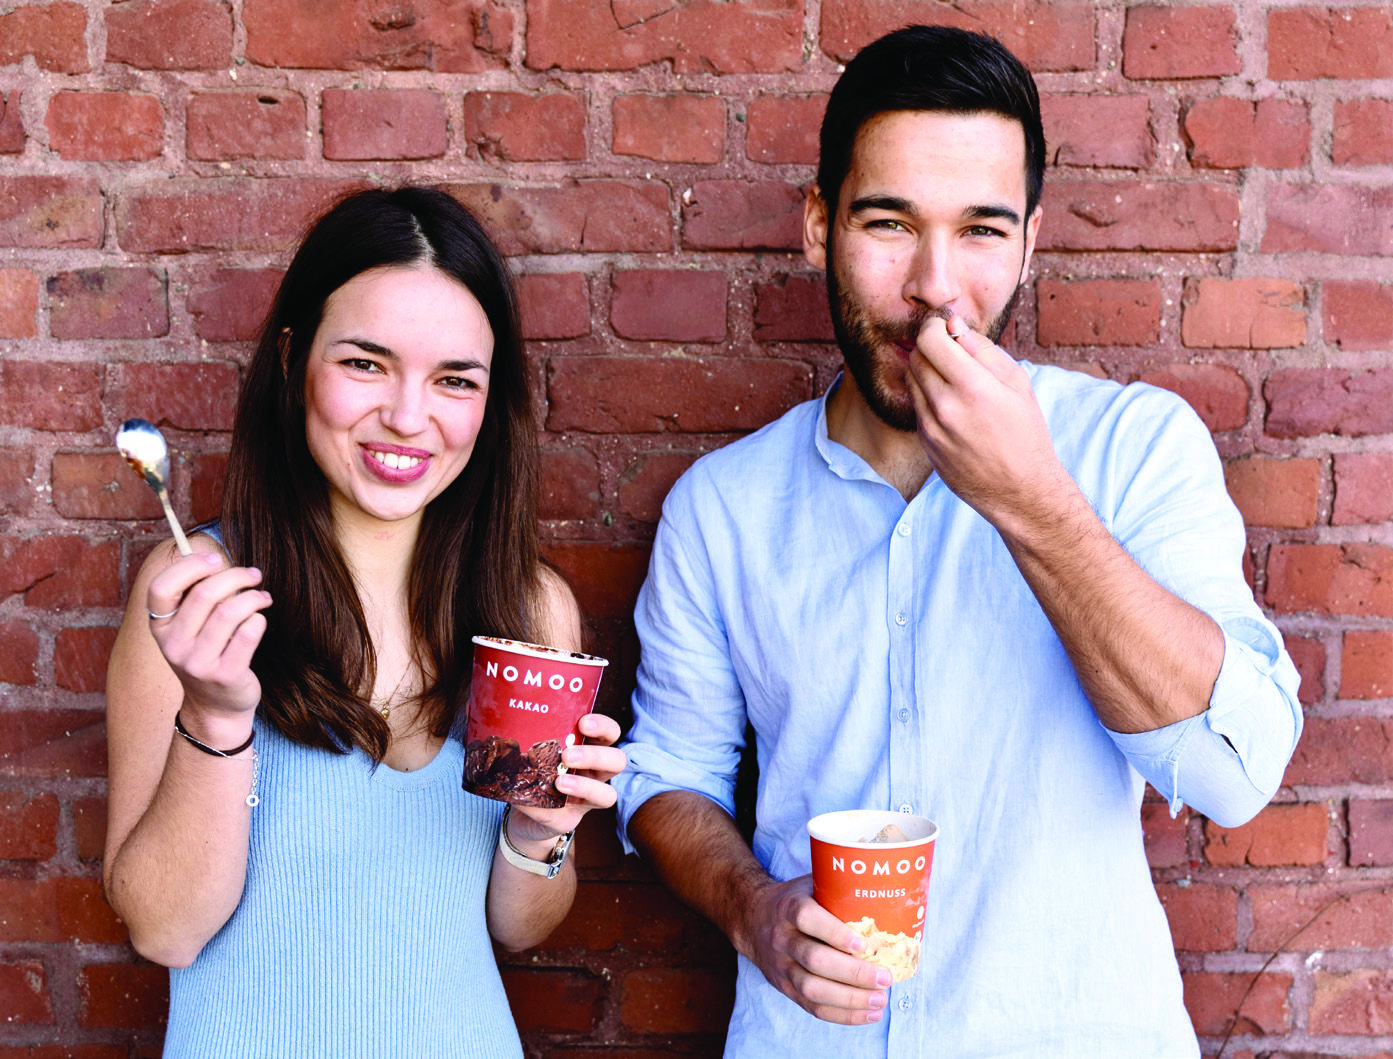 Plant-based ice cream brand Nomoo picks up all the benefits of GS1 GDSN